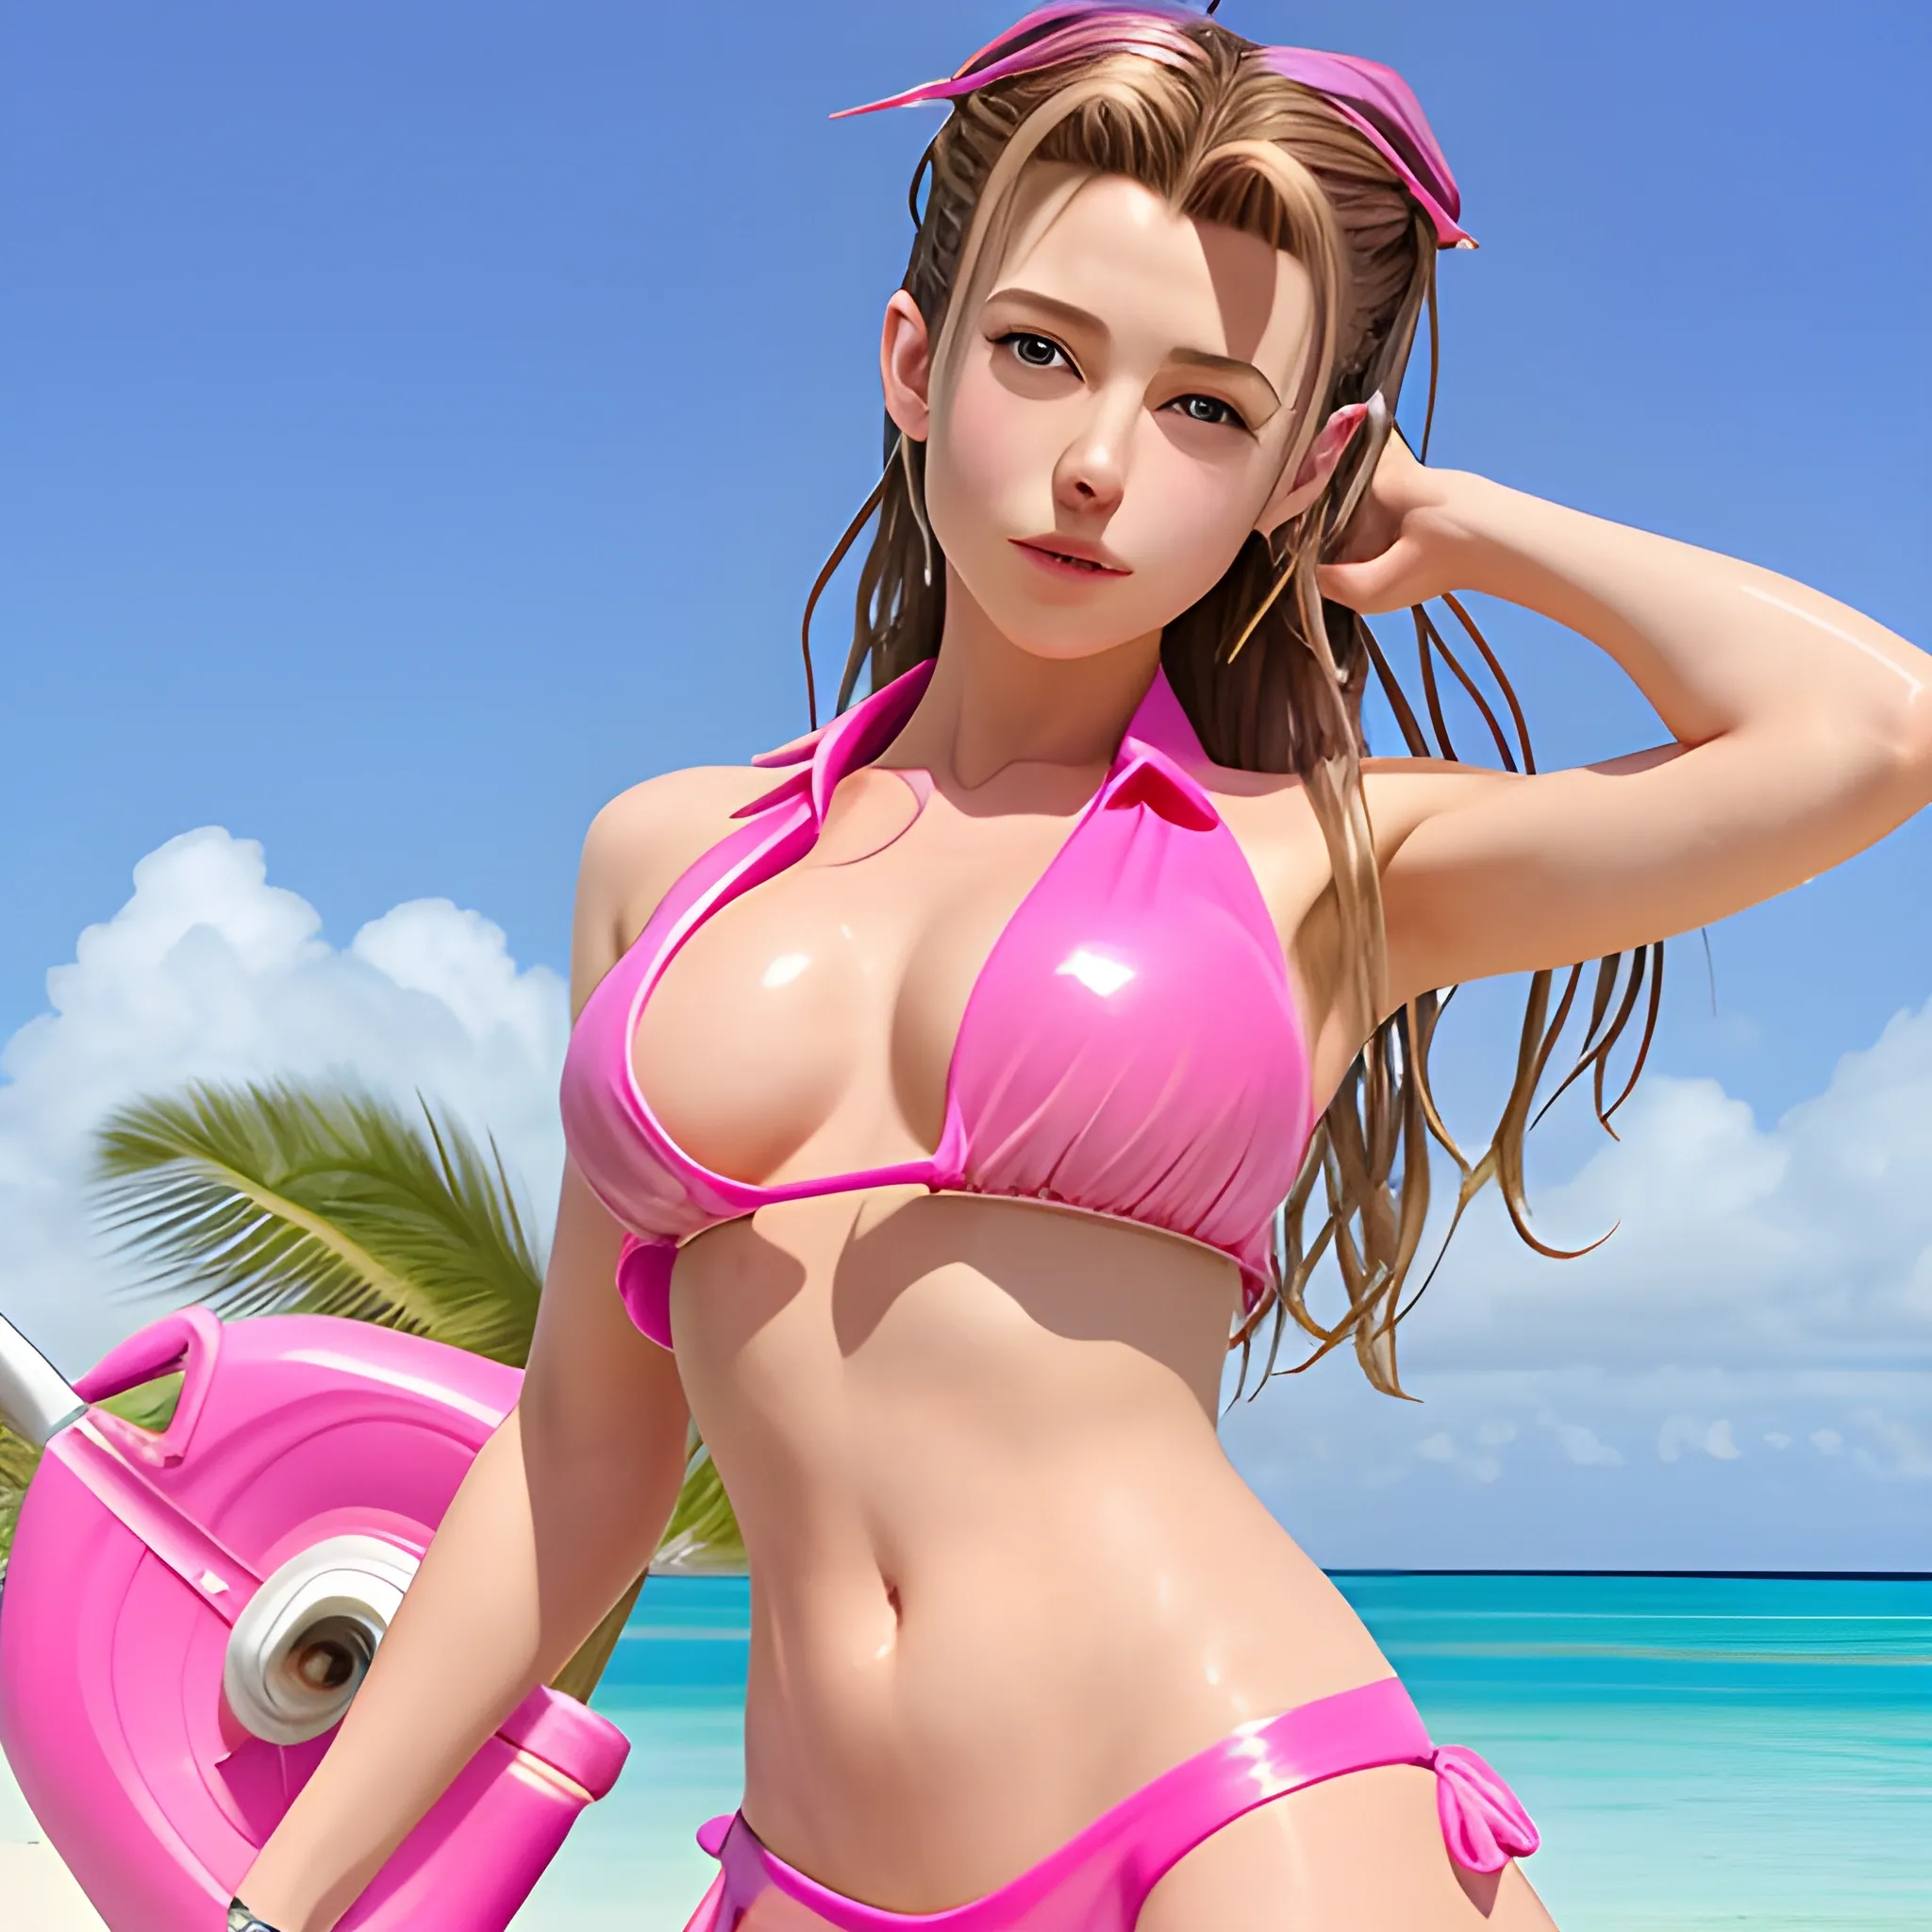 Aerith Gainsborough in pink latex bikini on a tropical beach, chest naked, chest visible, whole body visible High details